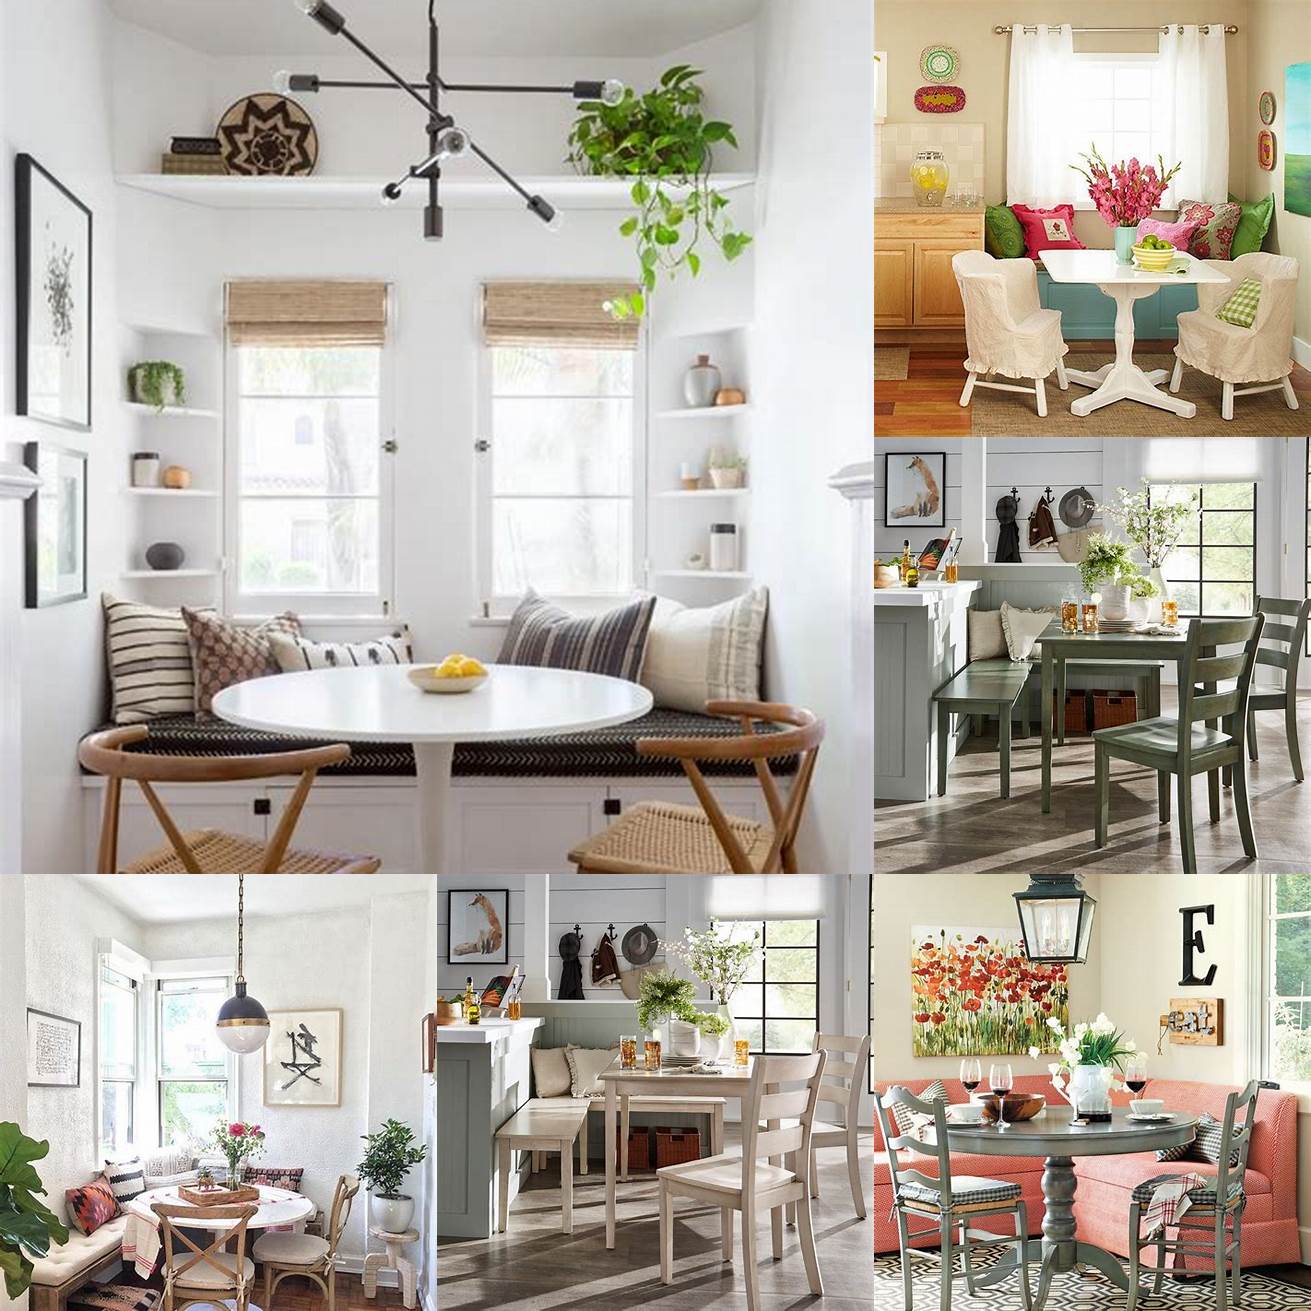 A cozy breakfast nook with a vintage table and mismatched chairs